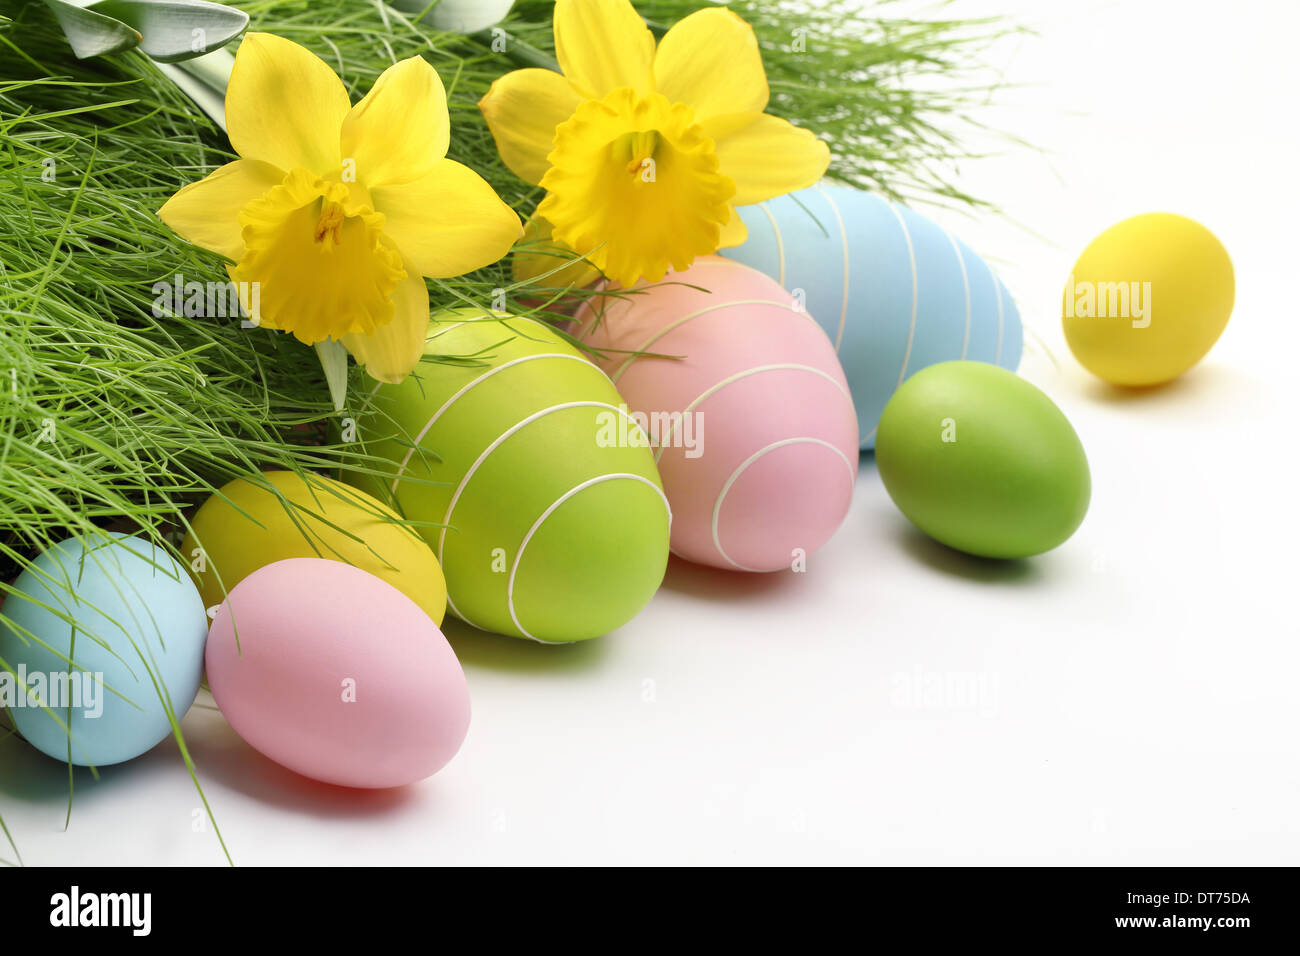 Easter eggs and Fresh Green Grass on White Background Stock Photo